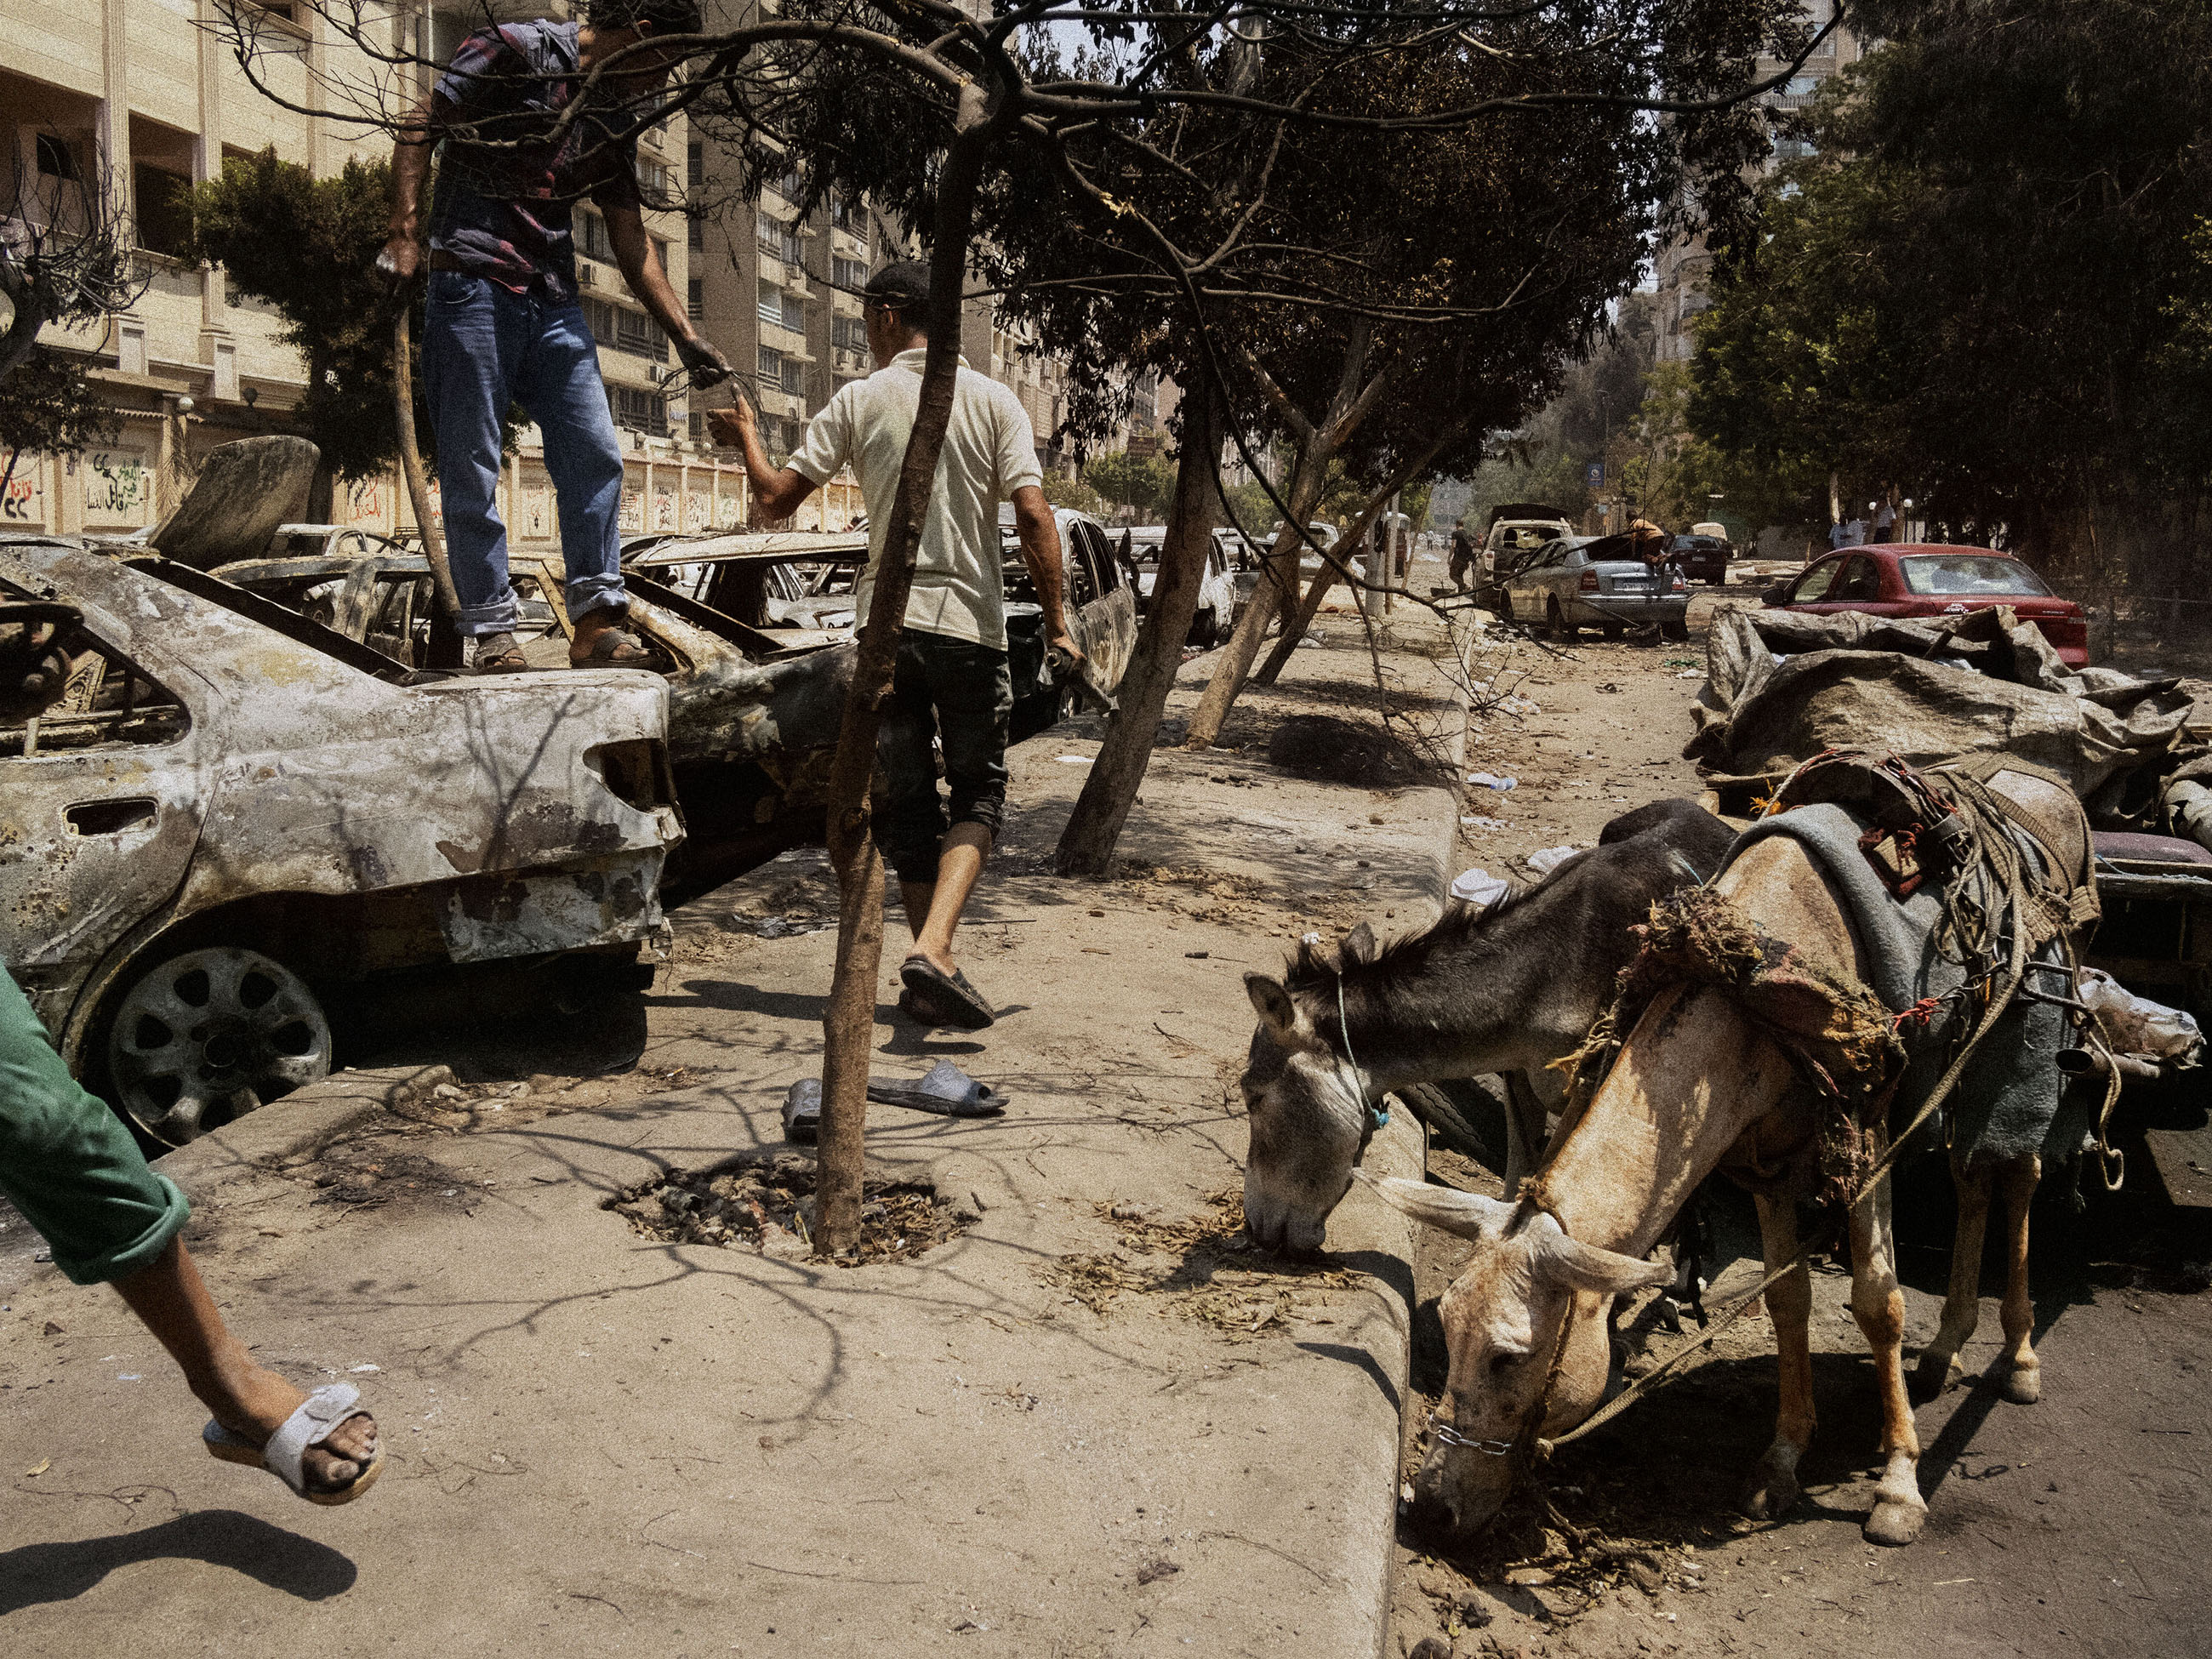 Men collecting scrap metal from burned cars and debris next to the Rabaa al-Adawiya mosque in Nasr City, the site of a massacre against Muslim Brotherhood supporters at the hands of the Egyptian police and army. Cairo, Egypt, 2013.